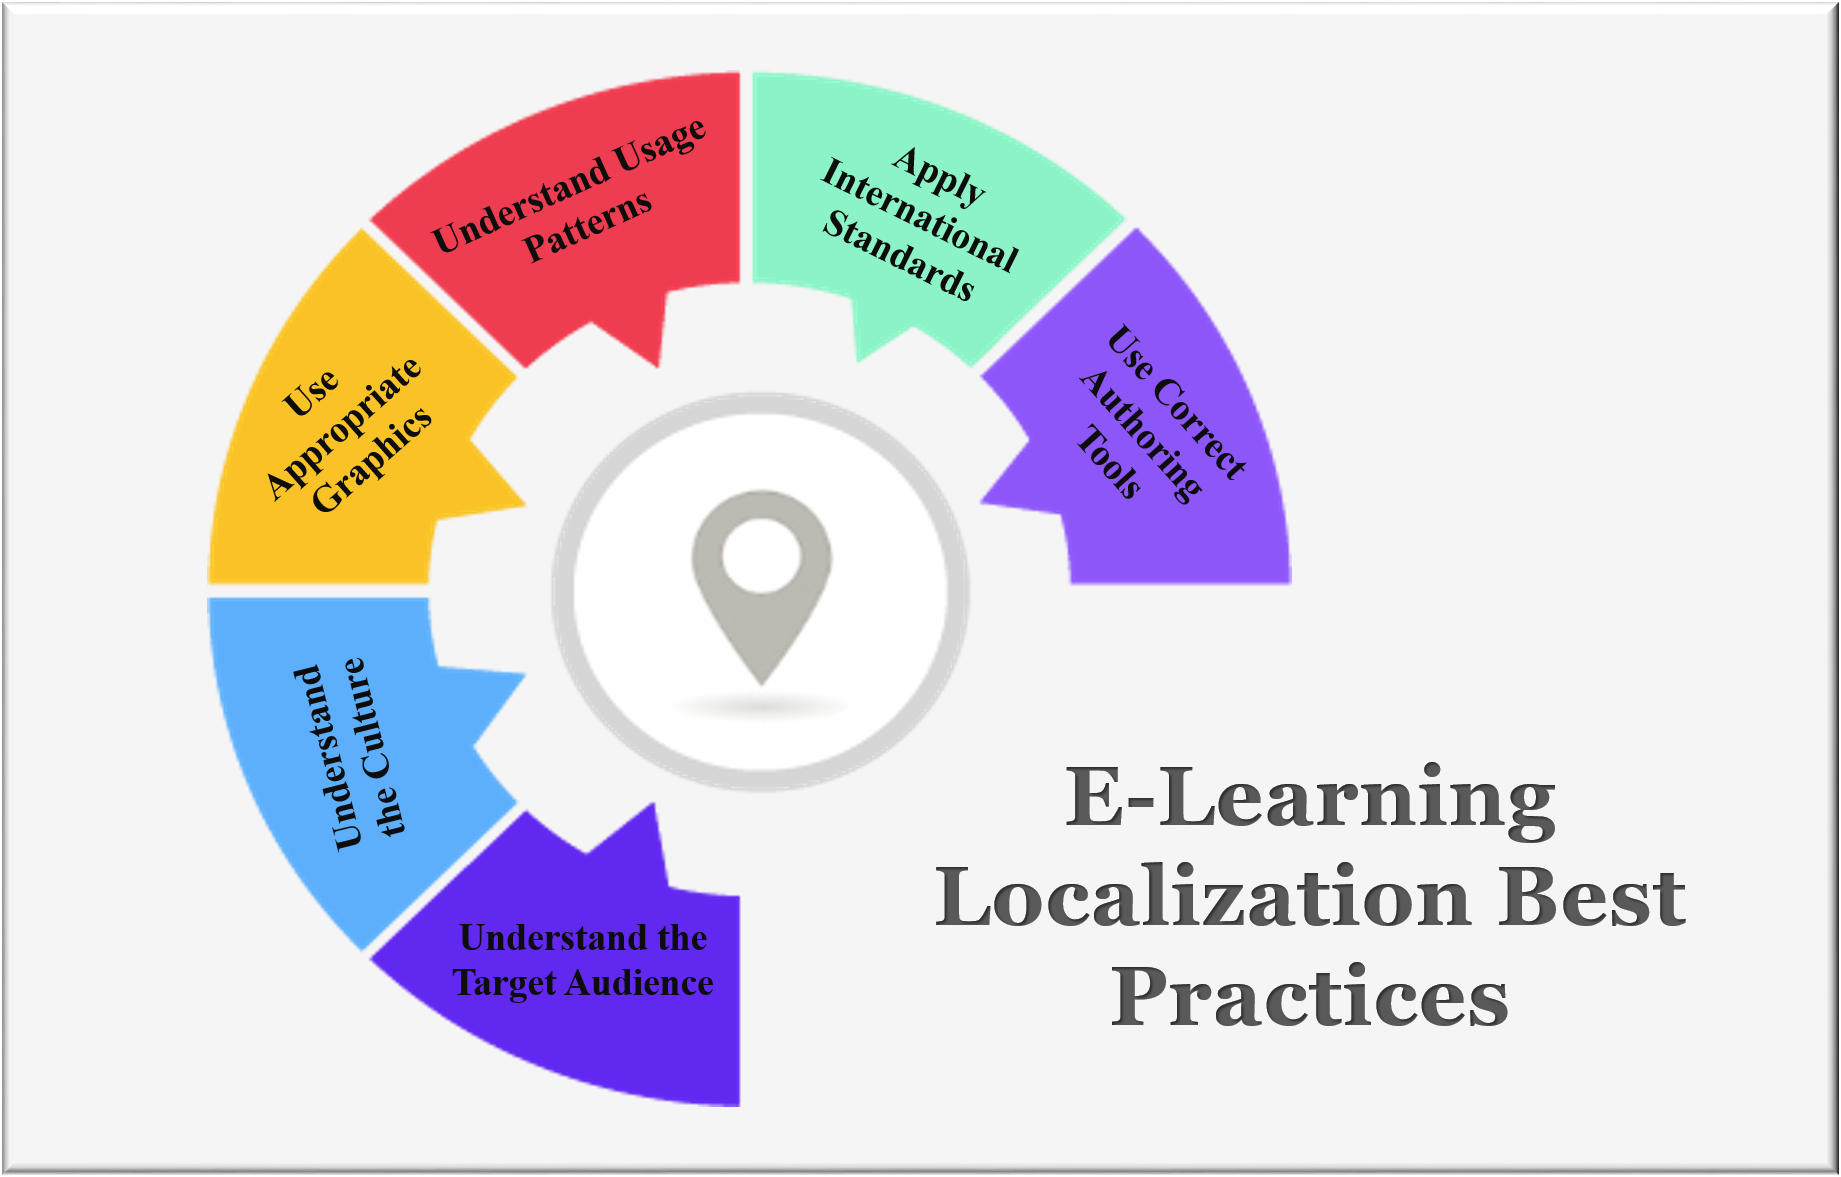 E-Learning Localization Best Practices